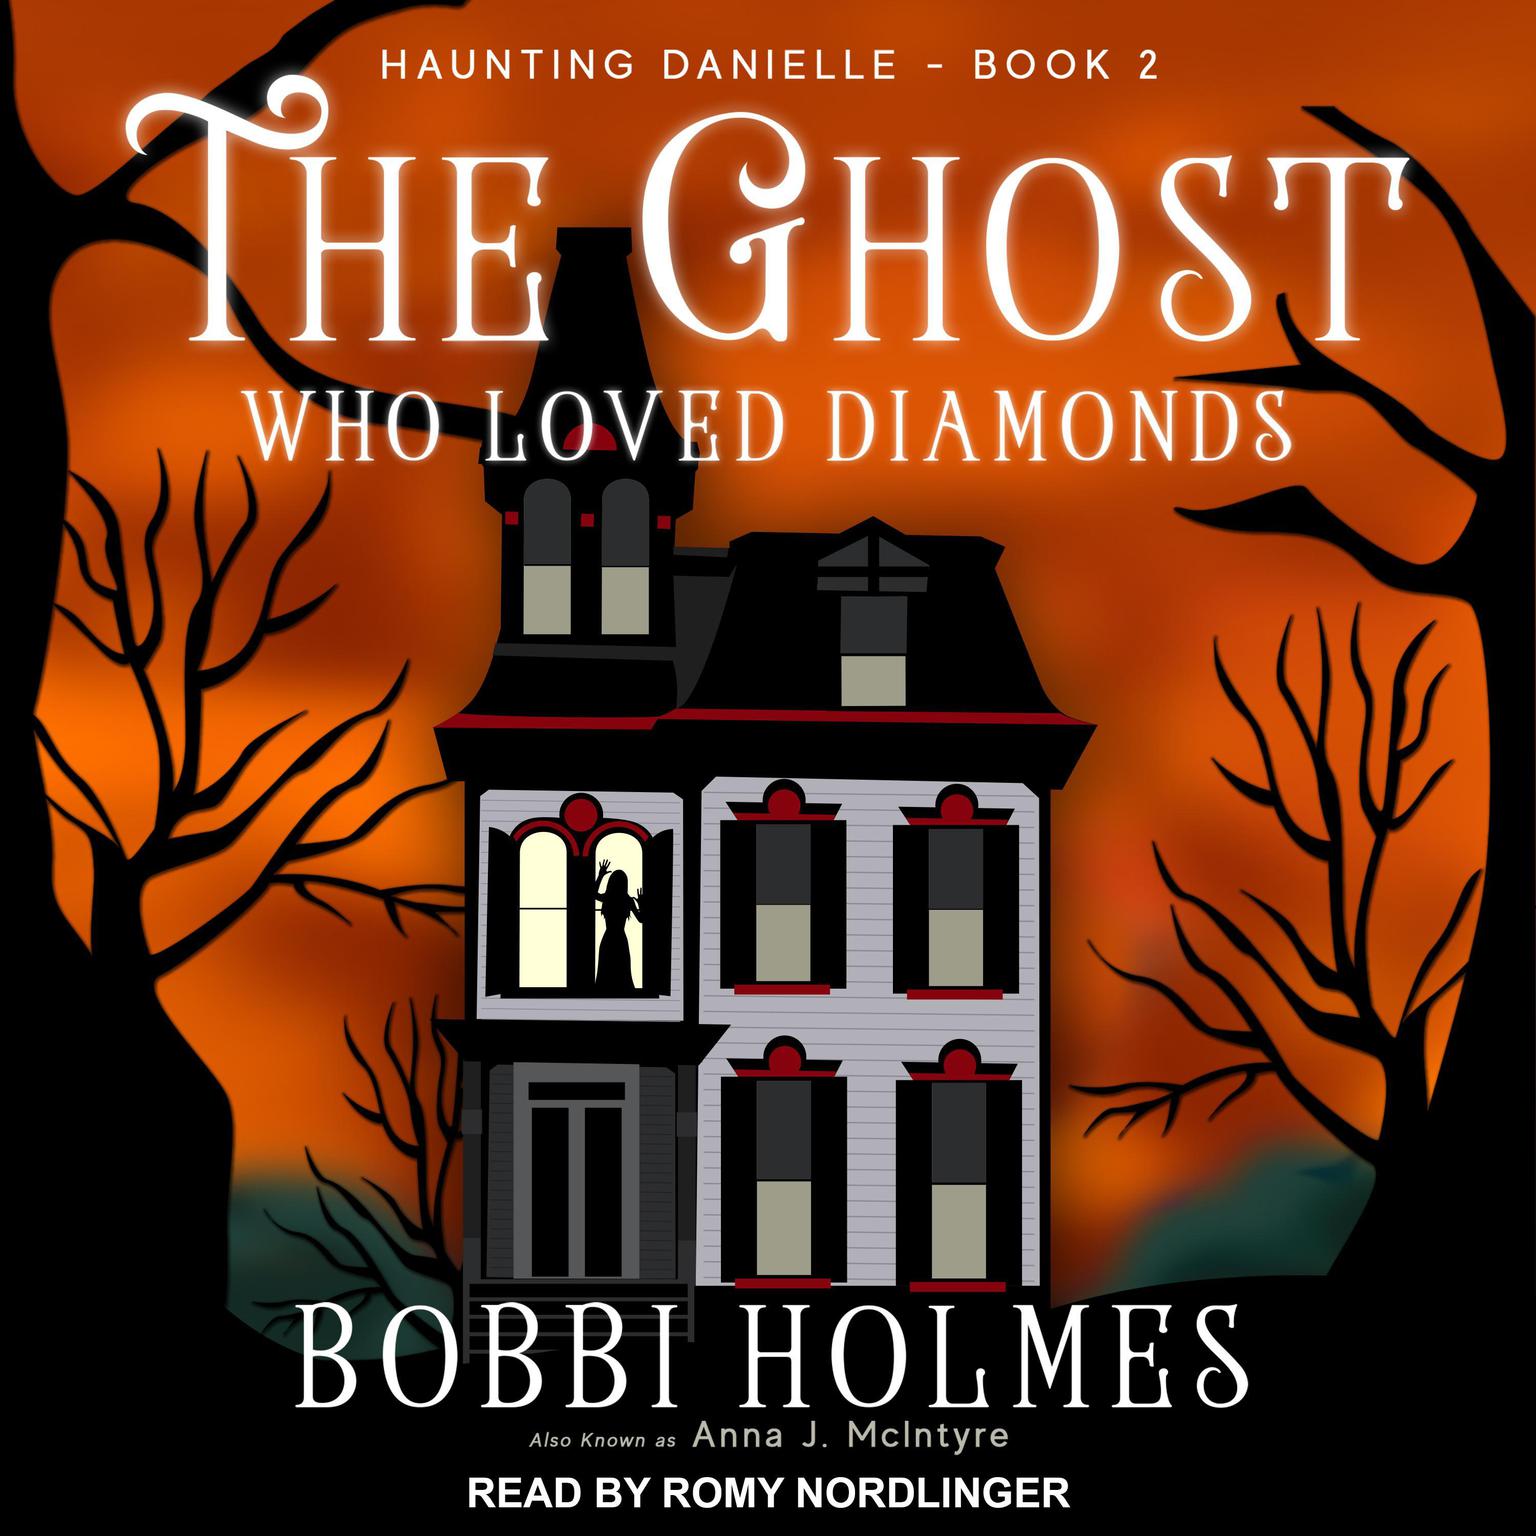 The Ghost Who Loved Diamonds Audiobook, by Bobbi Holmes